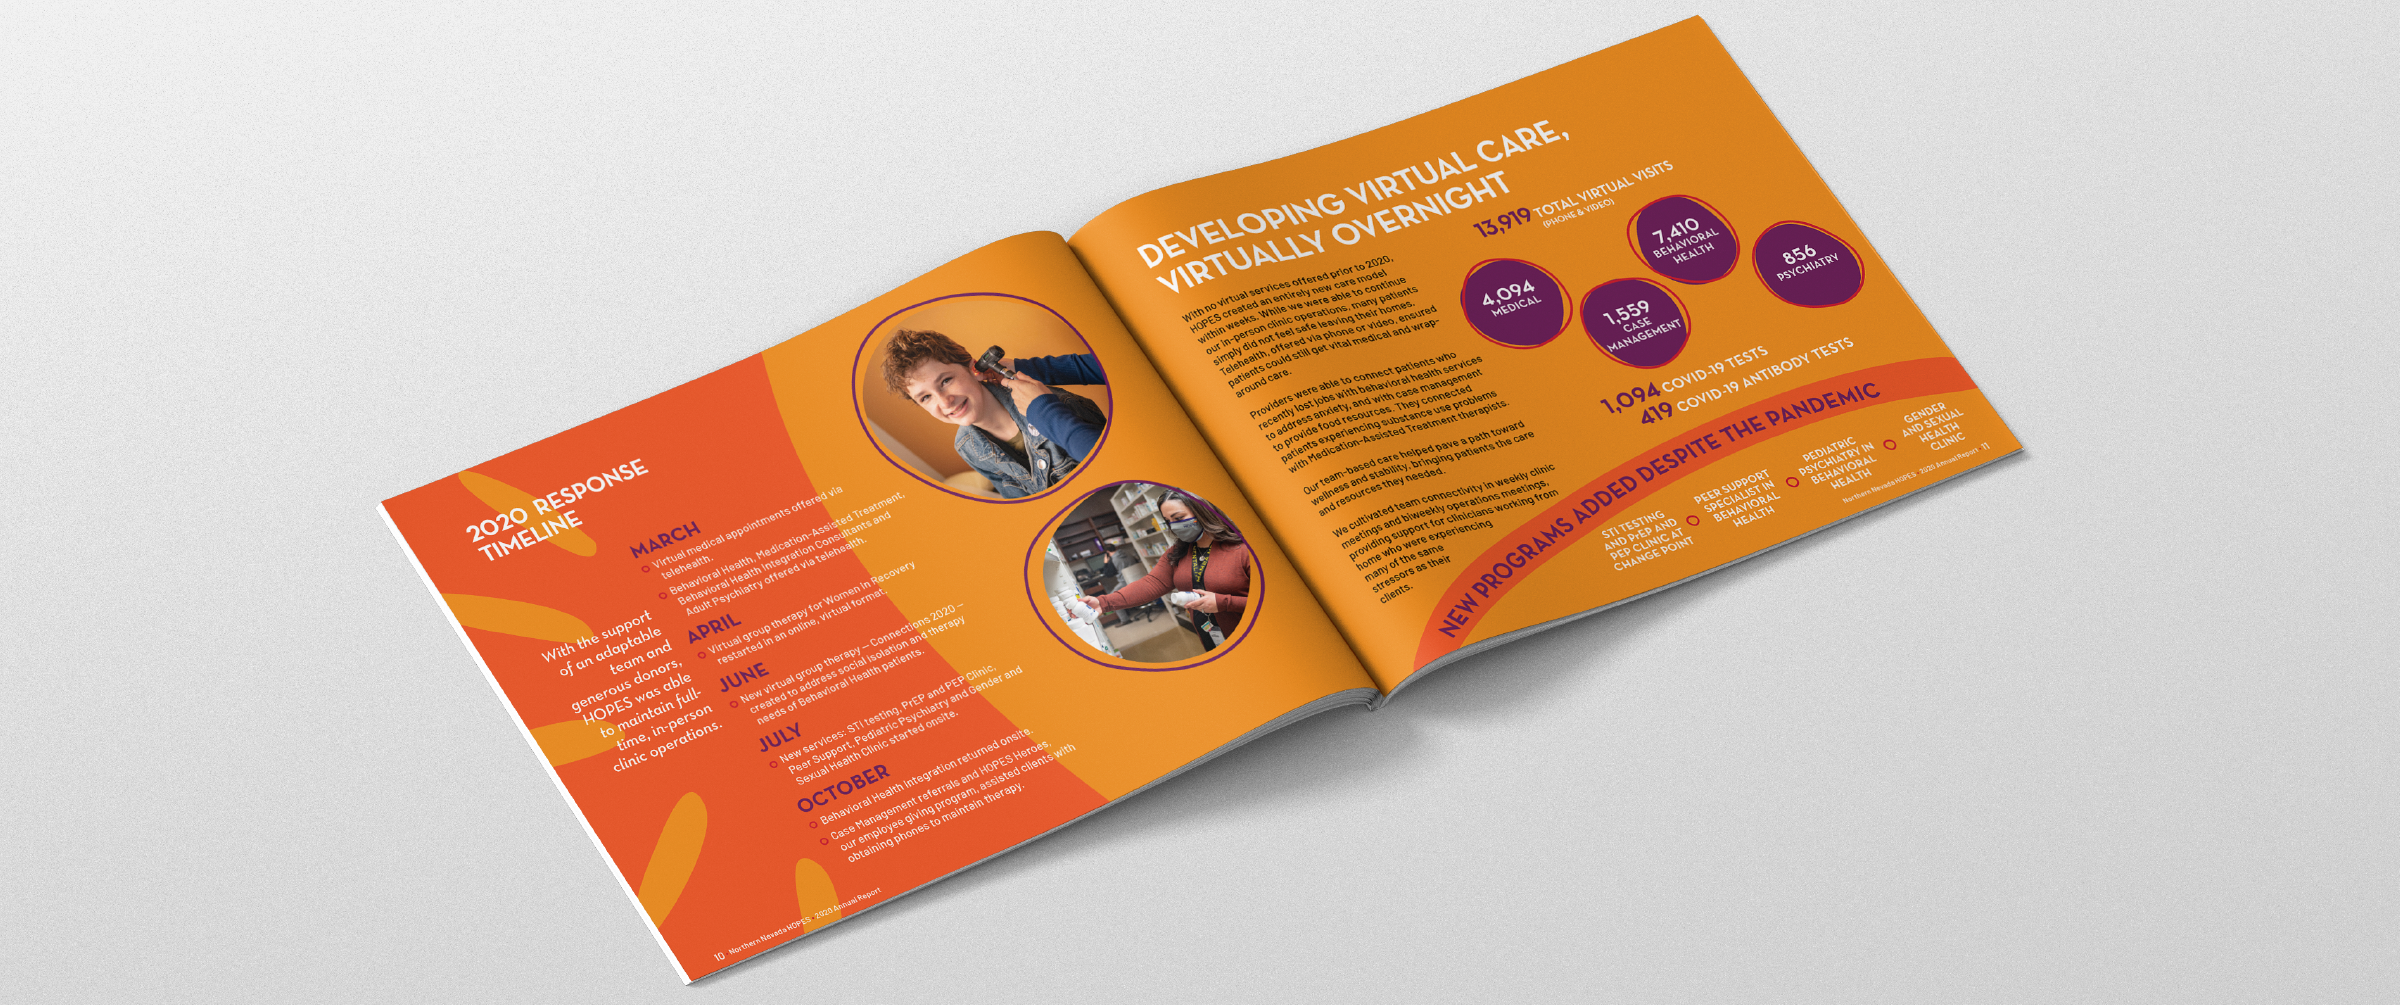 Northern Nevada Hopes Annual Report Mockup internal page featuring "Developing Virtual Care, Virtually Overnight"